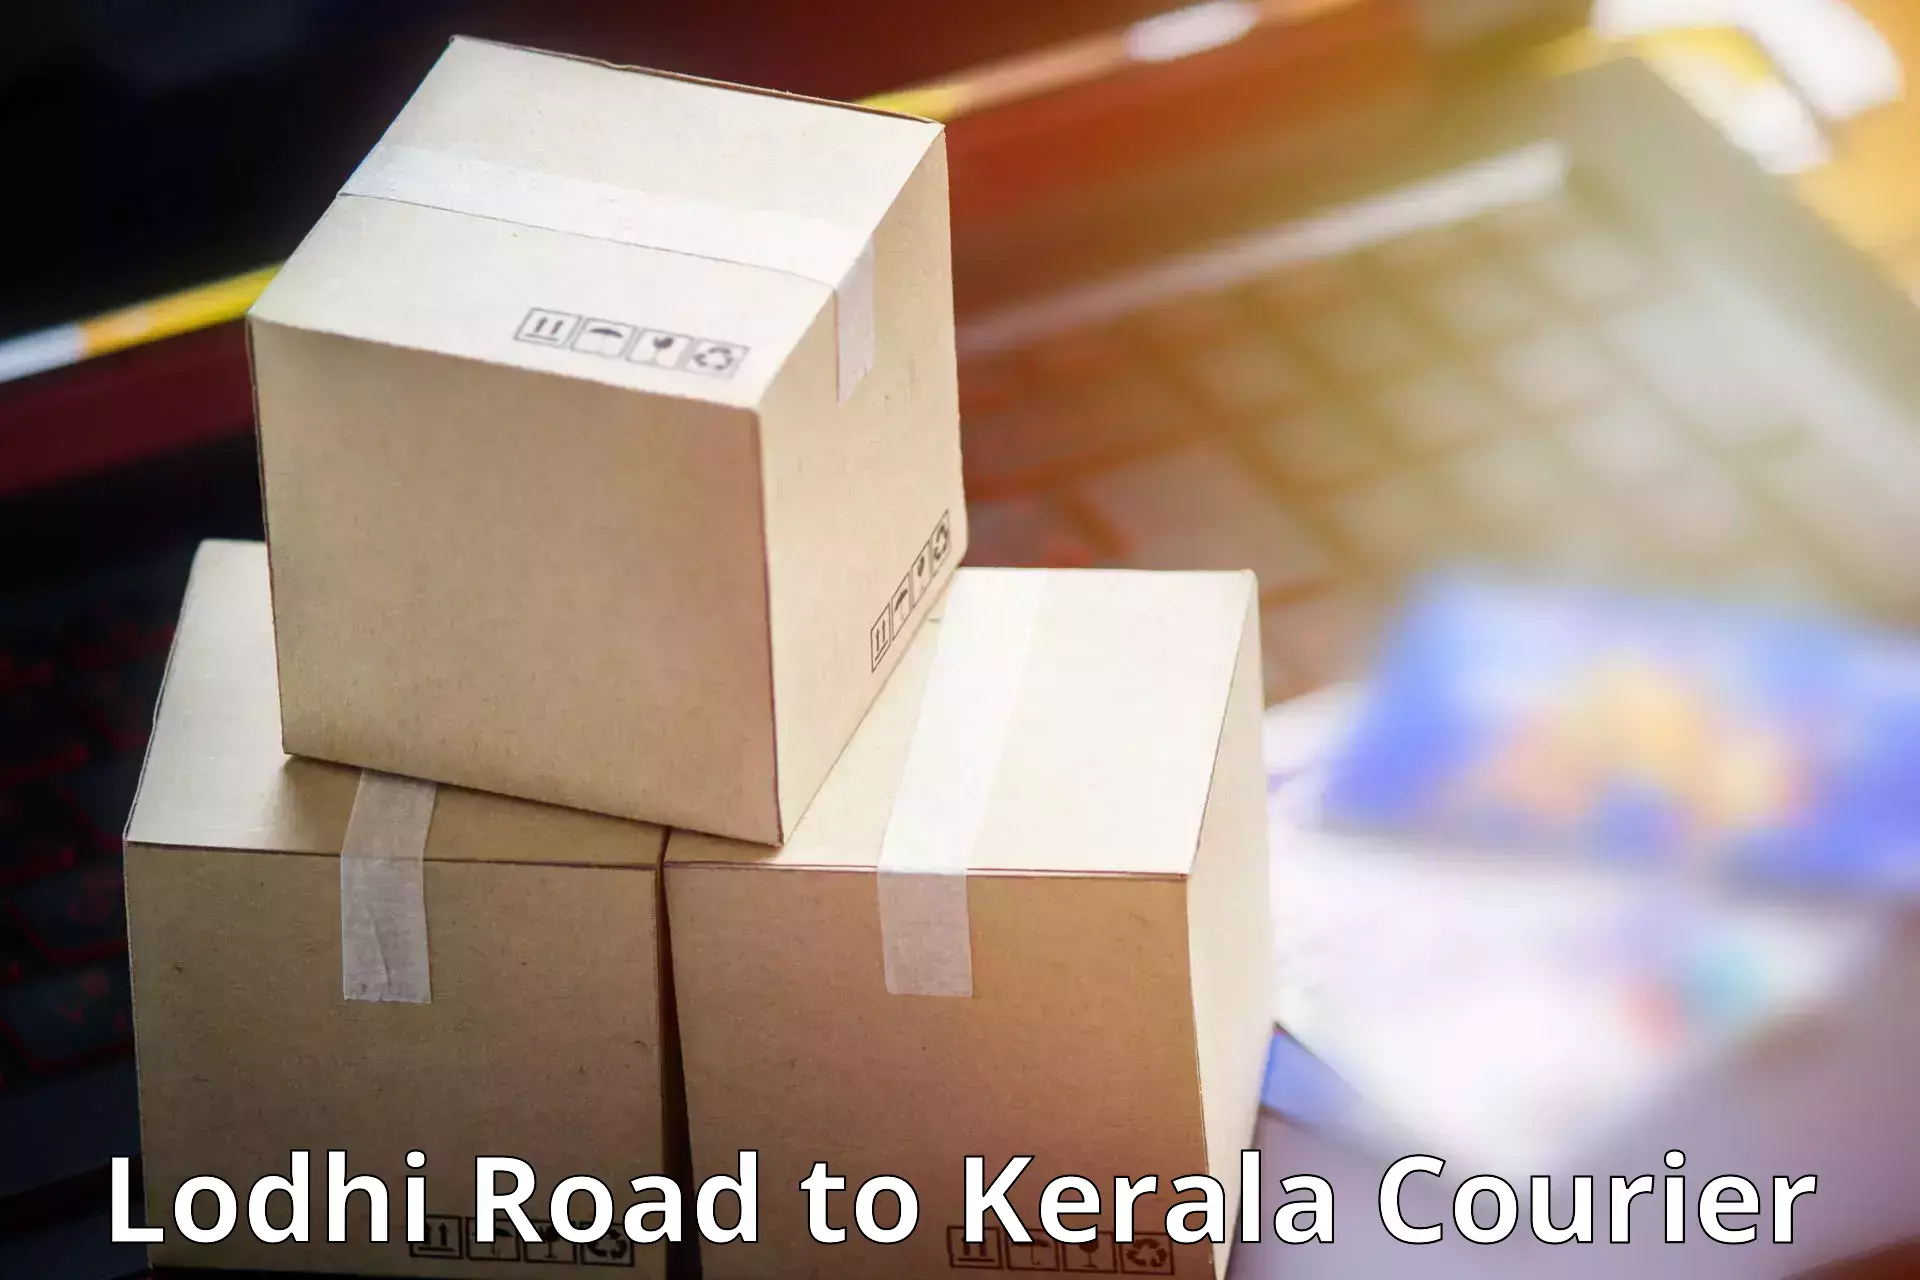 High-priority parcel service Lodhi Road to Alathur Malabar